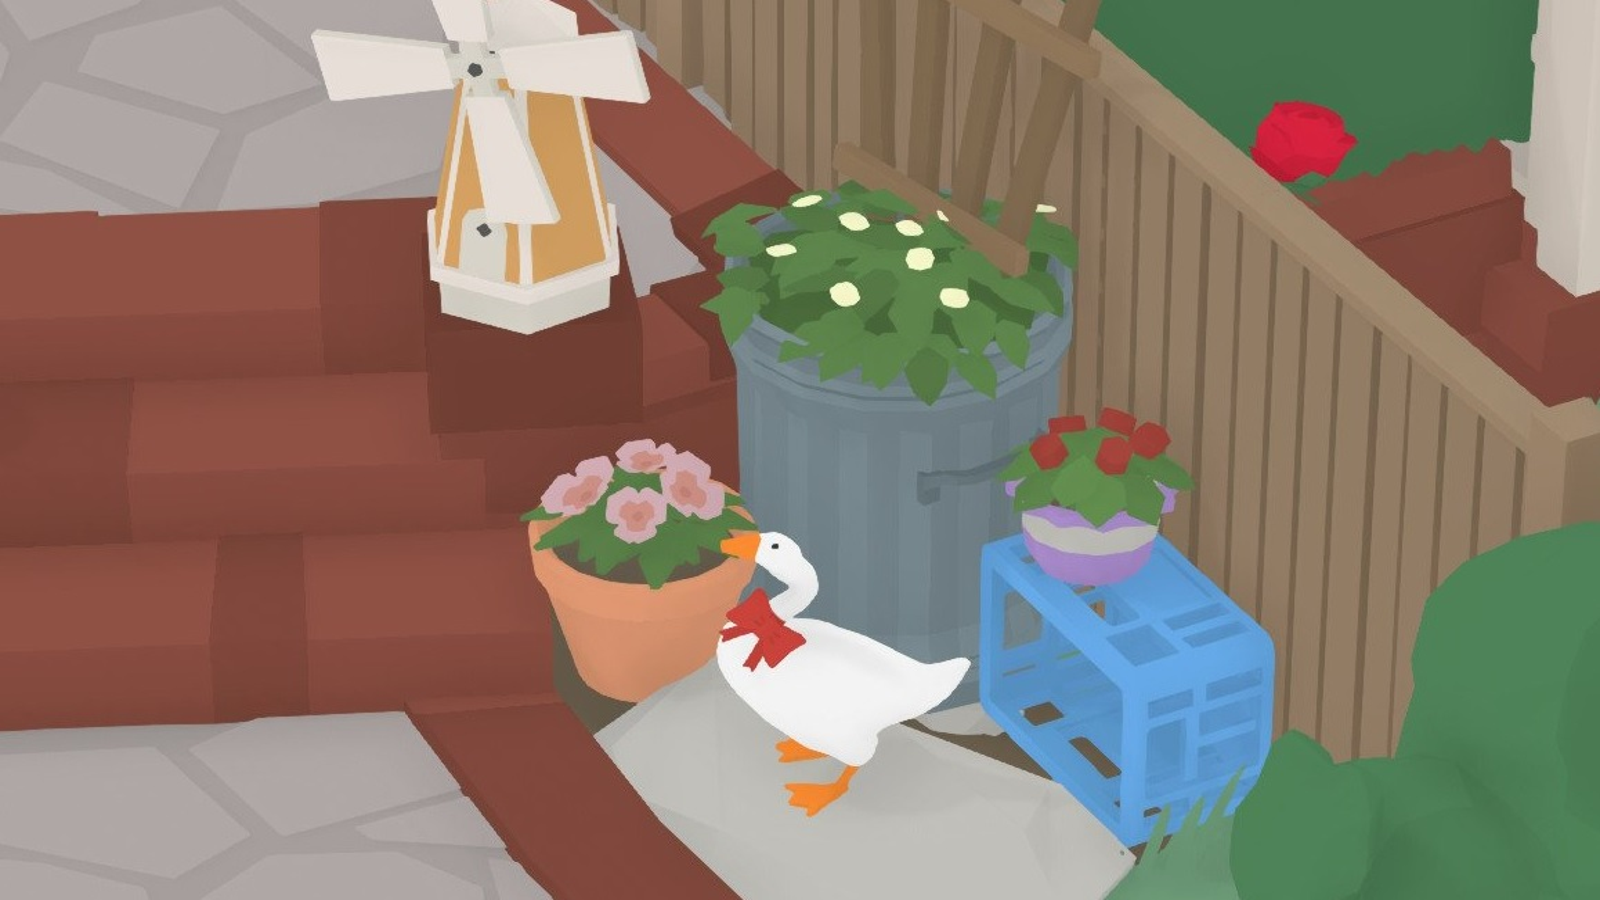 How to Help the Woman Dress up the Bust in Untitled Goose Game